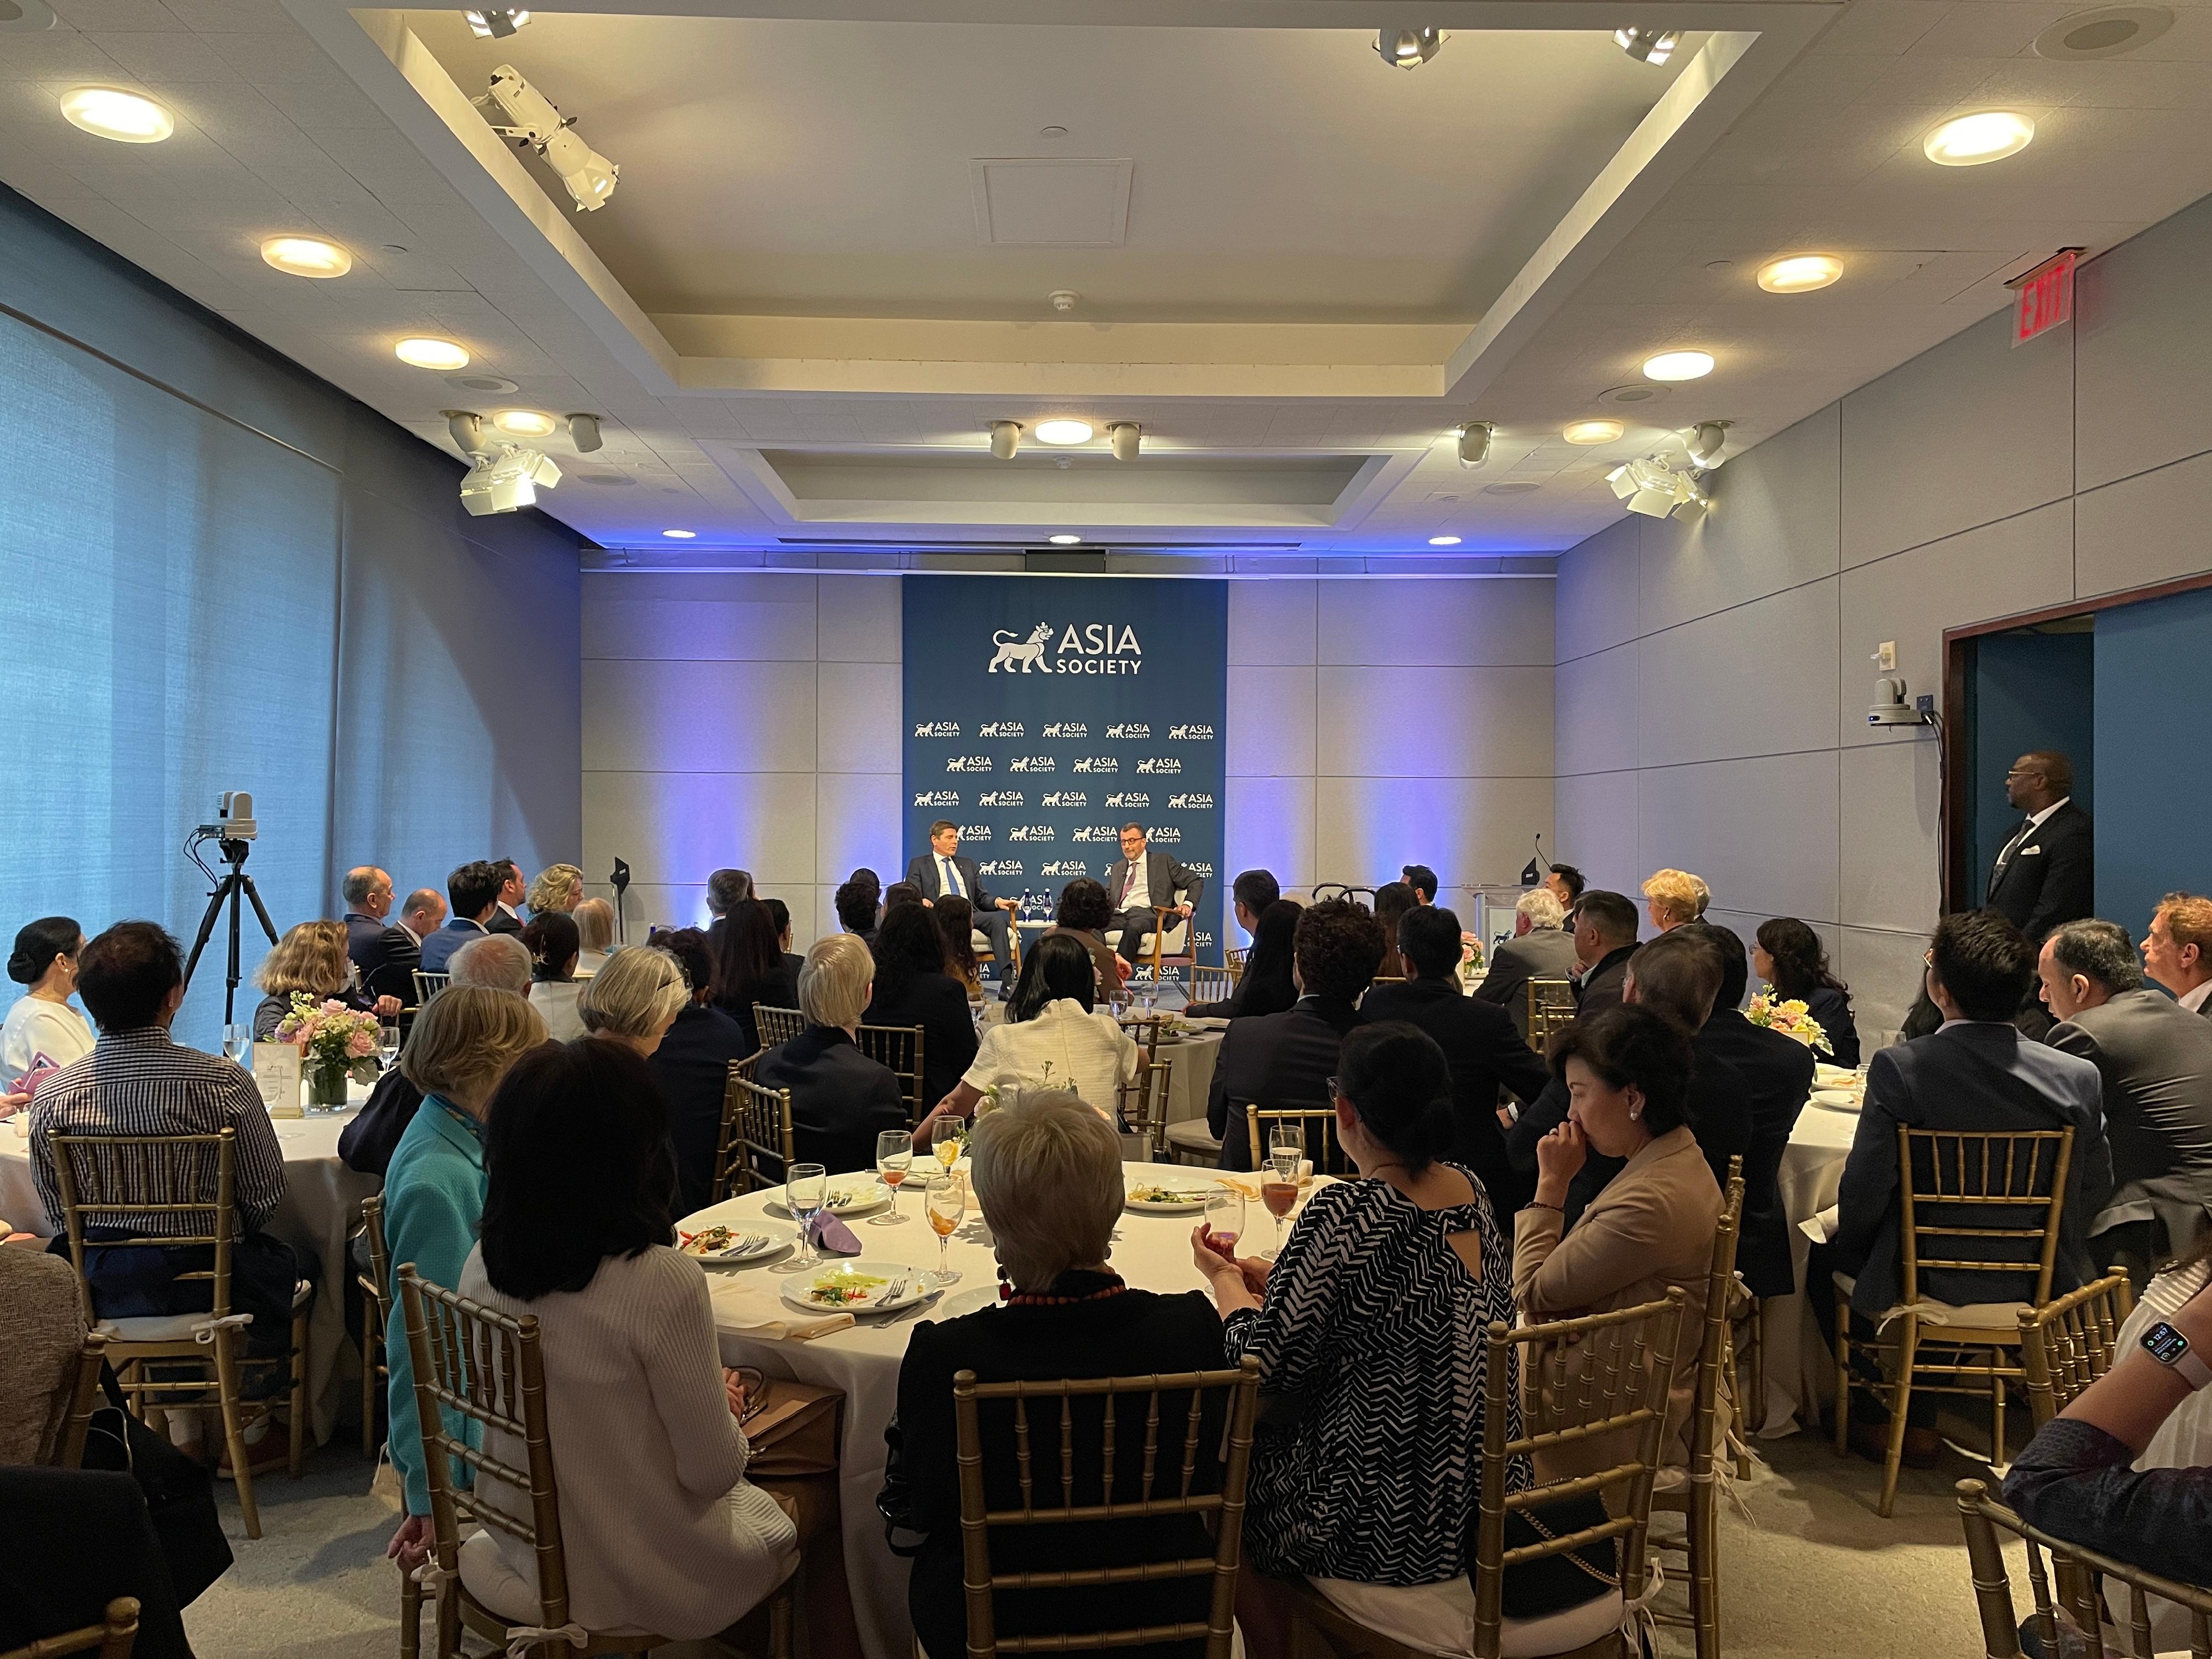 In collaboration with the Hong Kong Economic and Trade Office in New York, the Asia Society organised a luncheon with the Executive Director and Chief Executive Officer of the Hong Kong Exchanges and Clearing Limited, Mr Nicolas Aguzin (left), as the featured speaker.